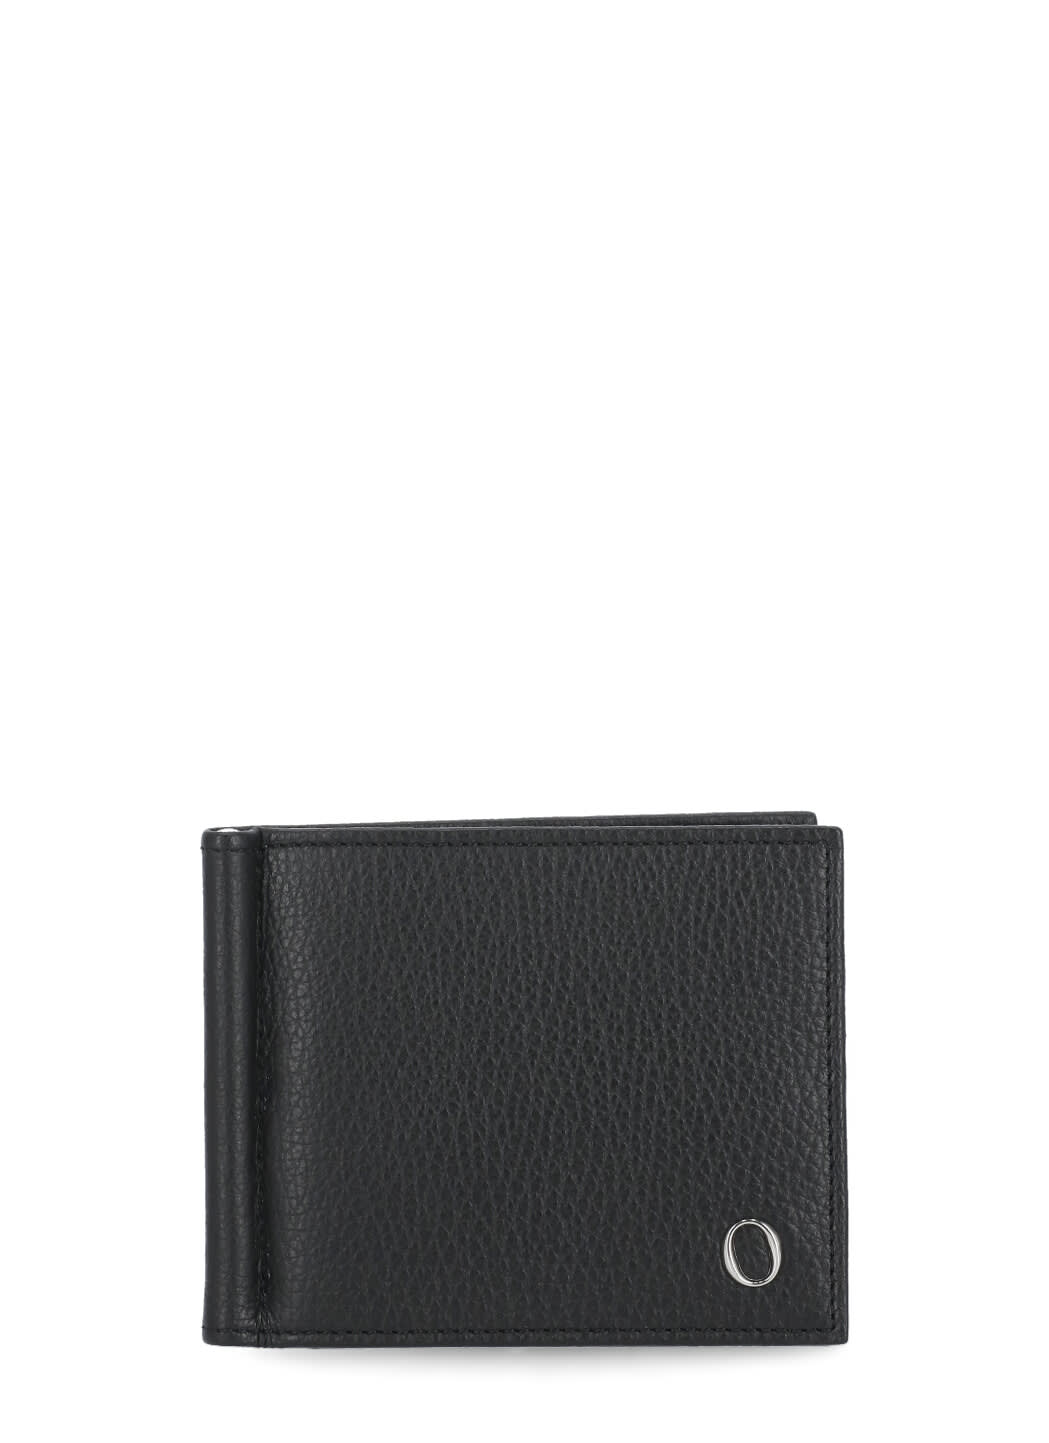 Orciani Micron Leather Wallet In Black